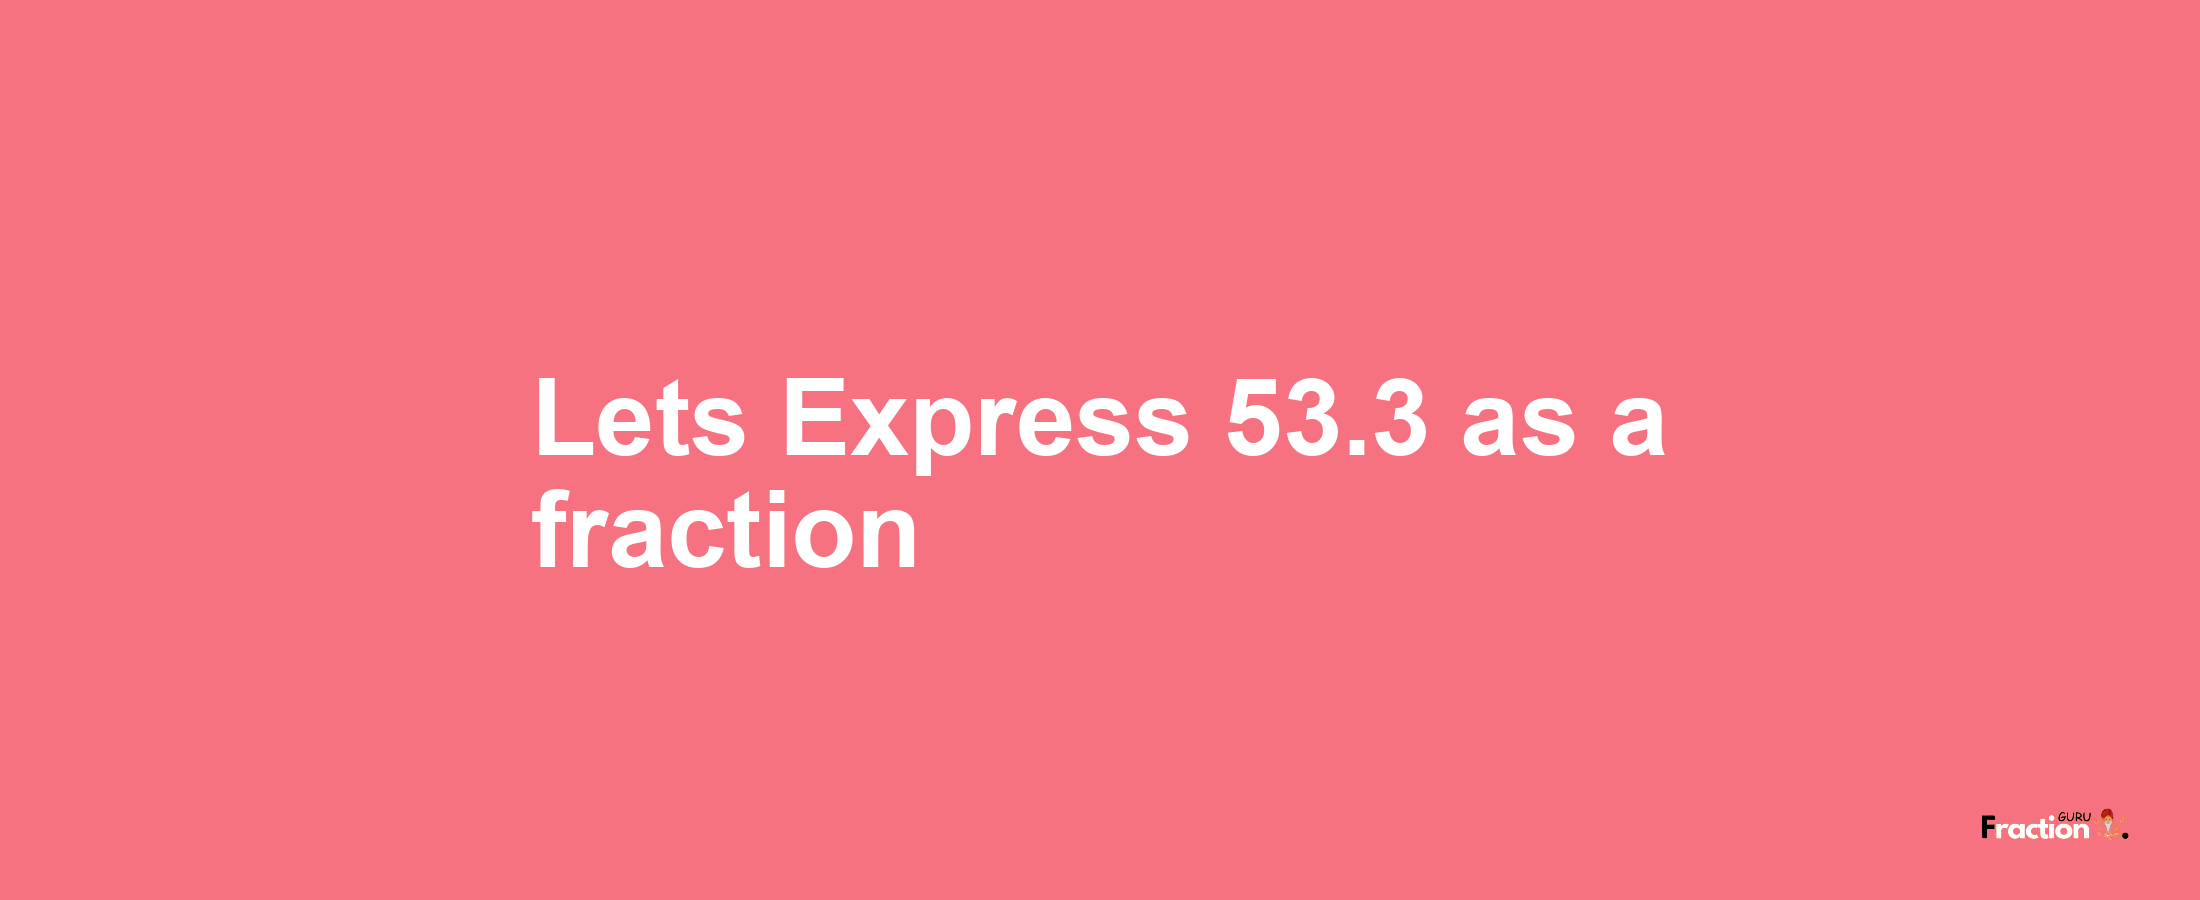 Lets Express 53.3 as afraction